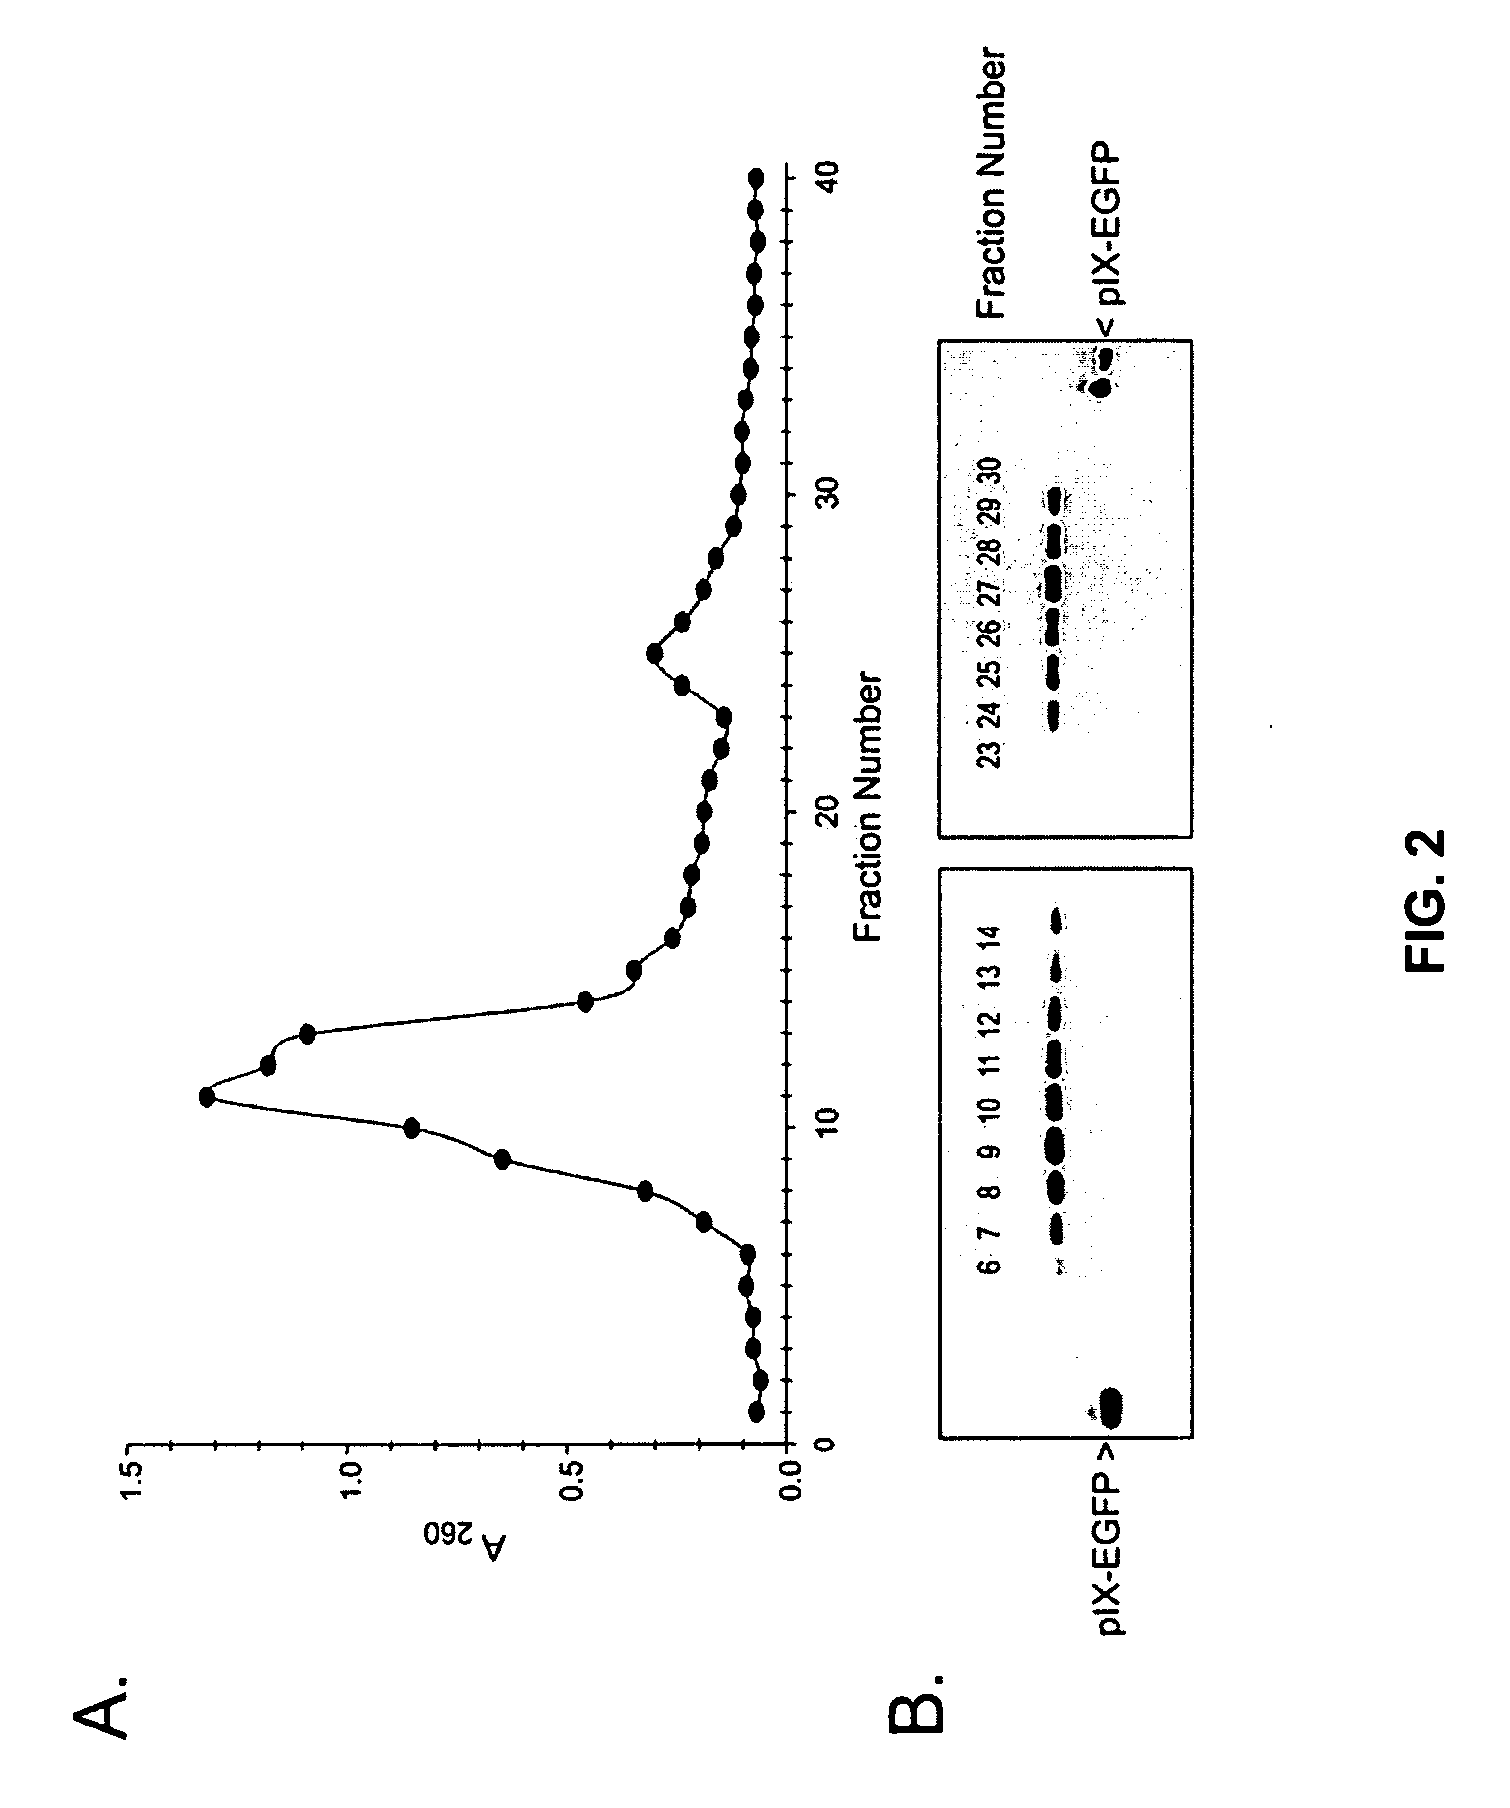 Shielded adenoviral vectors and methods of use